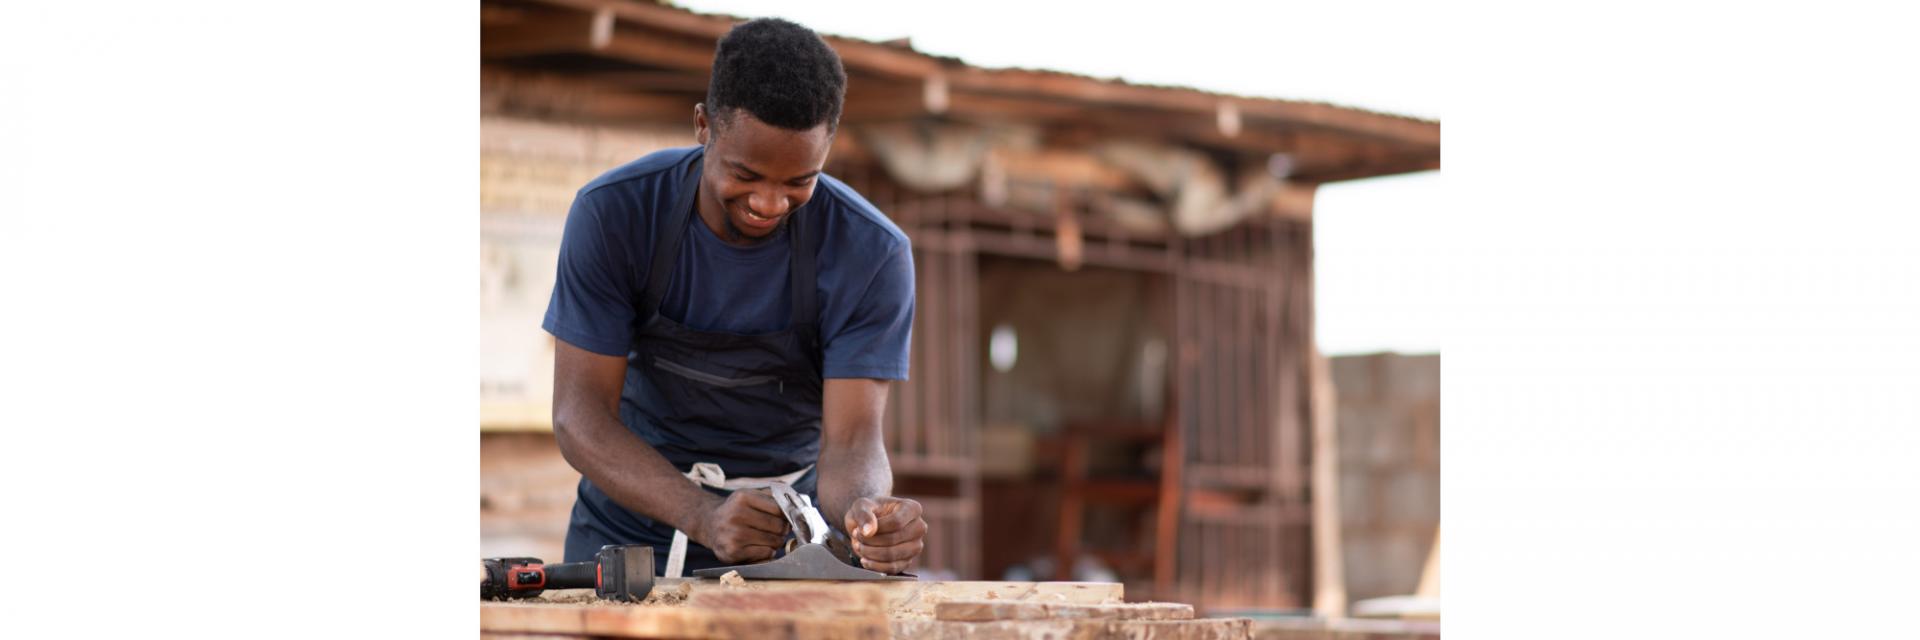 Call to improve jobs for youth in Africa